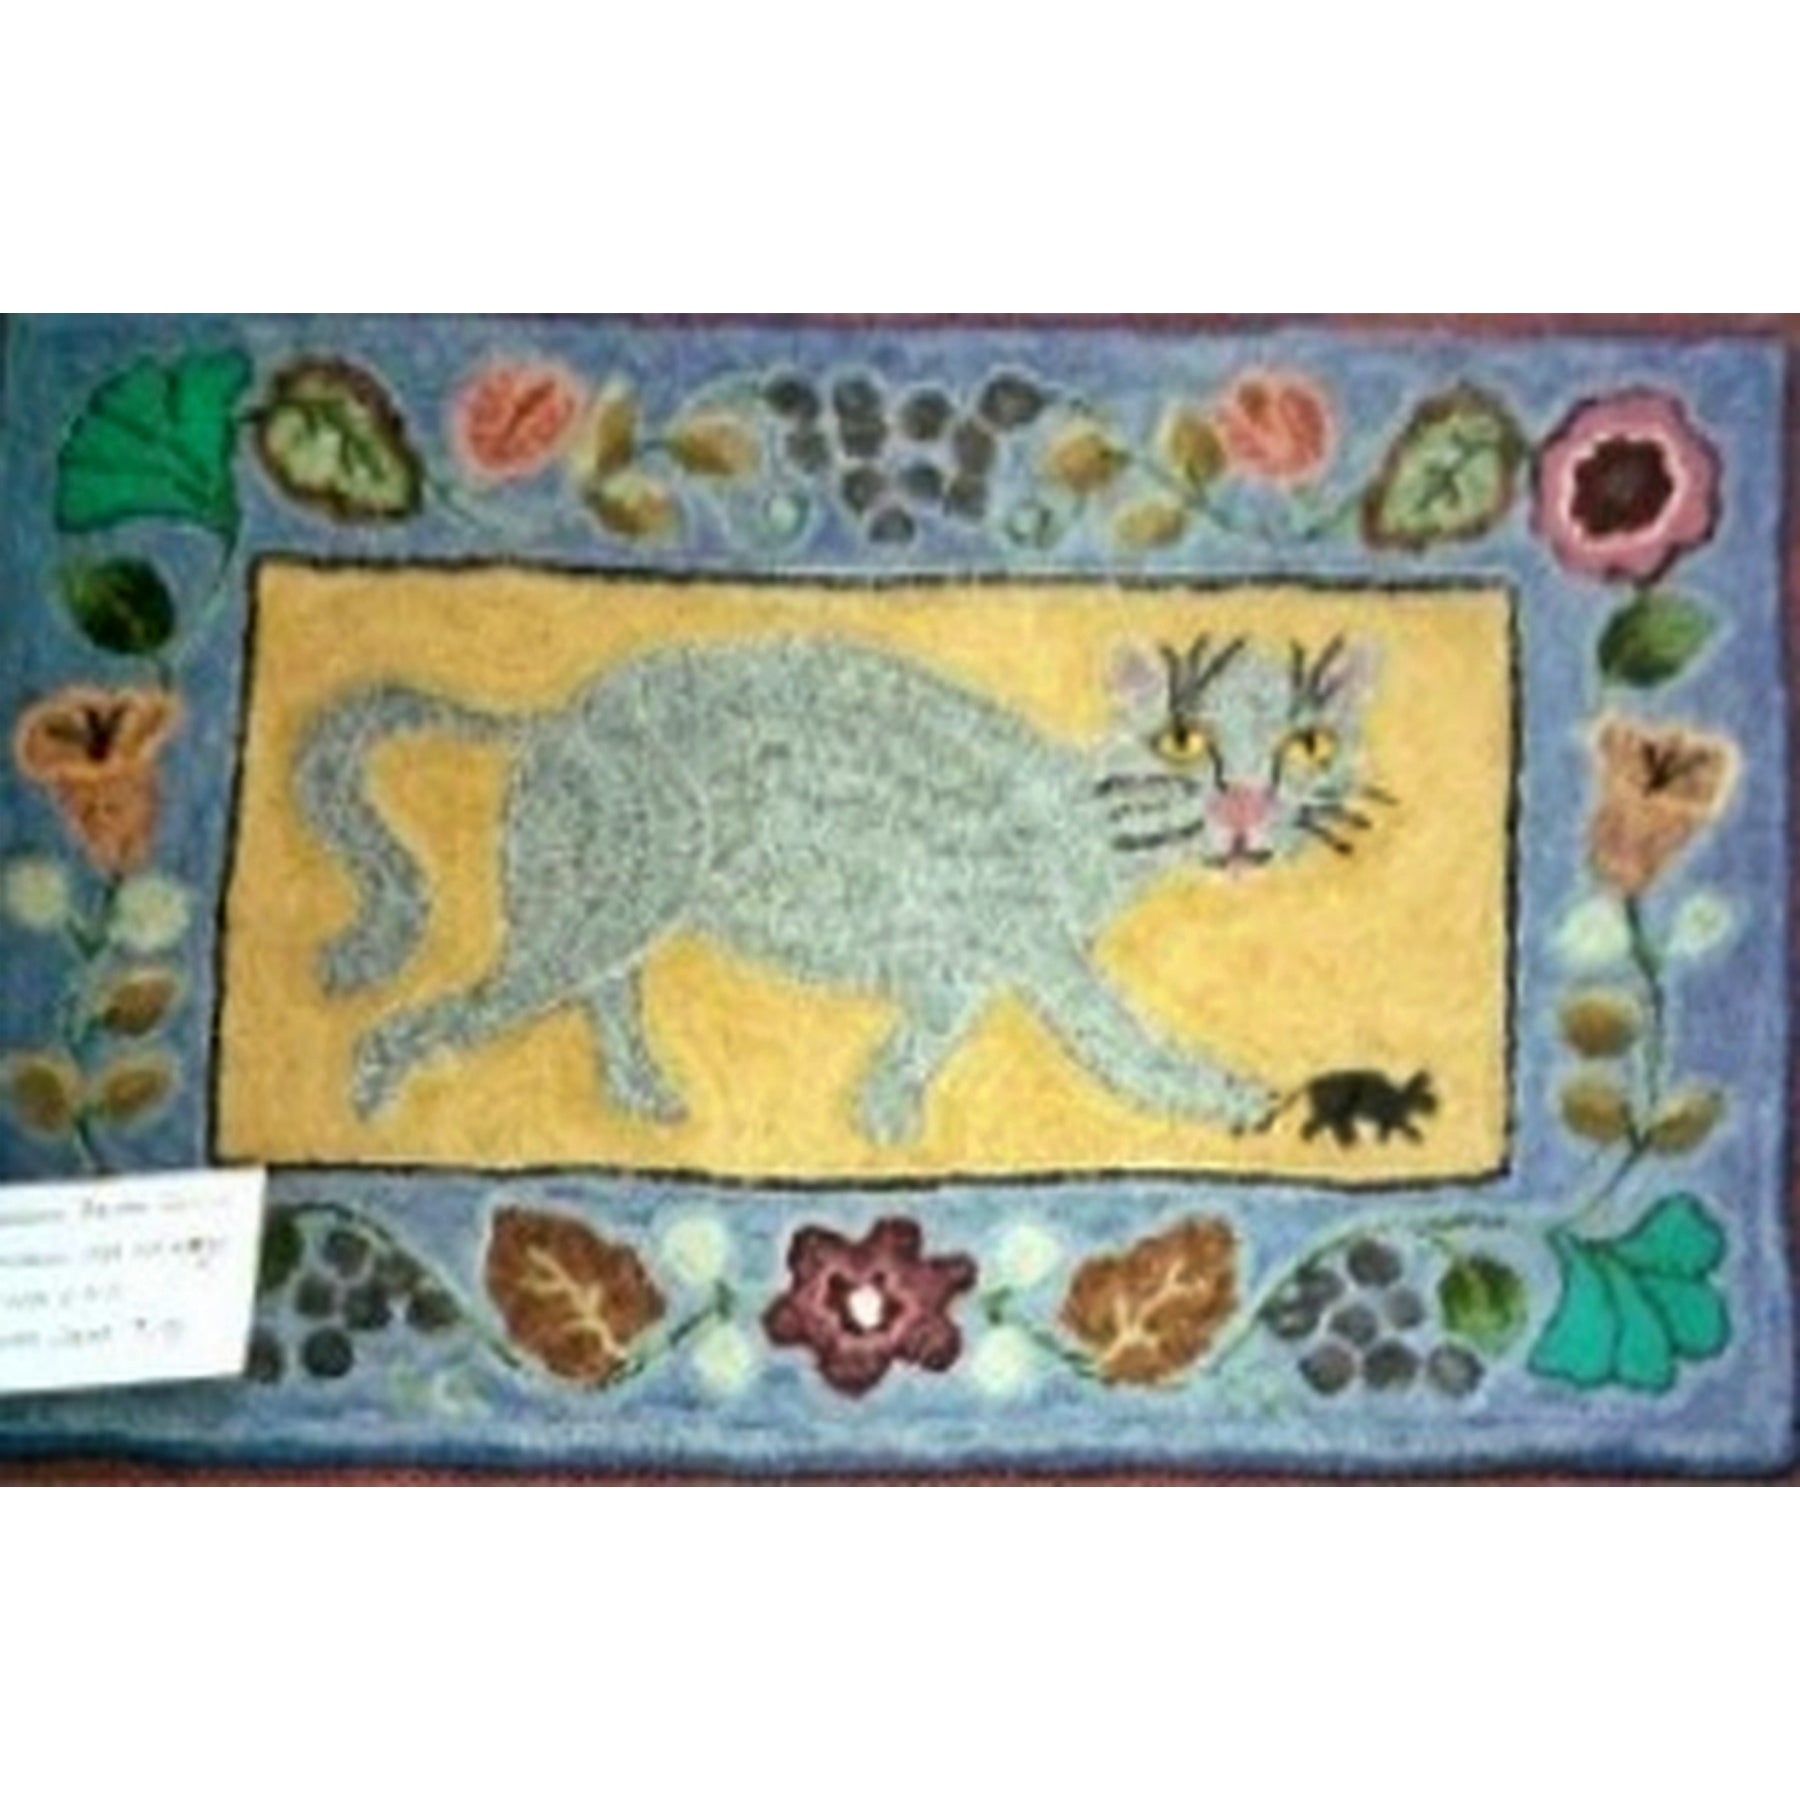 Whimsical Cat, rug hooked by Basha Quilici